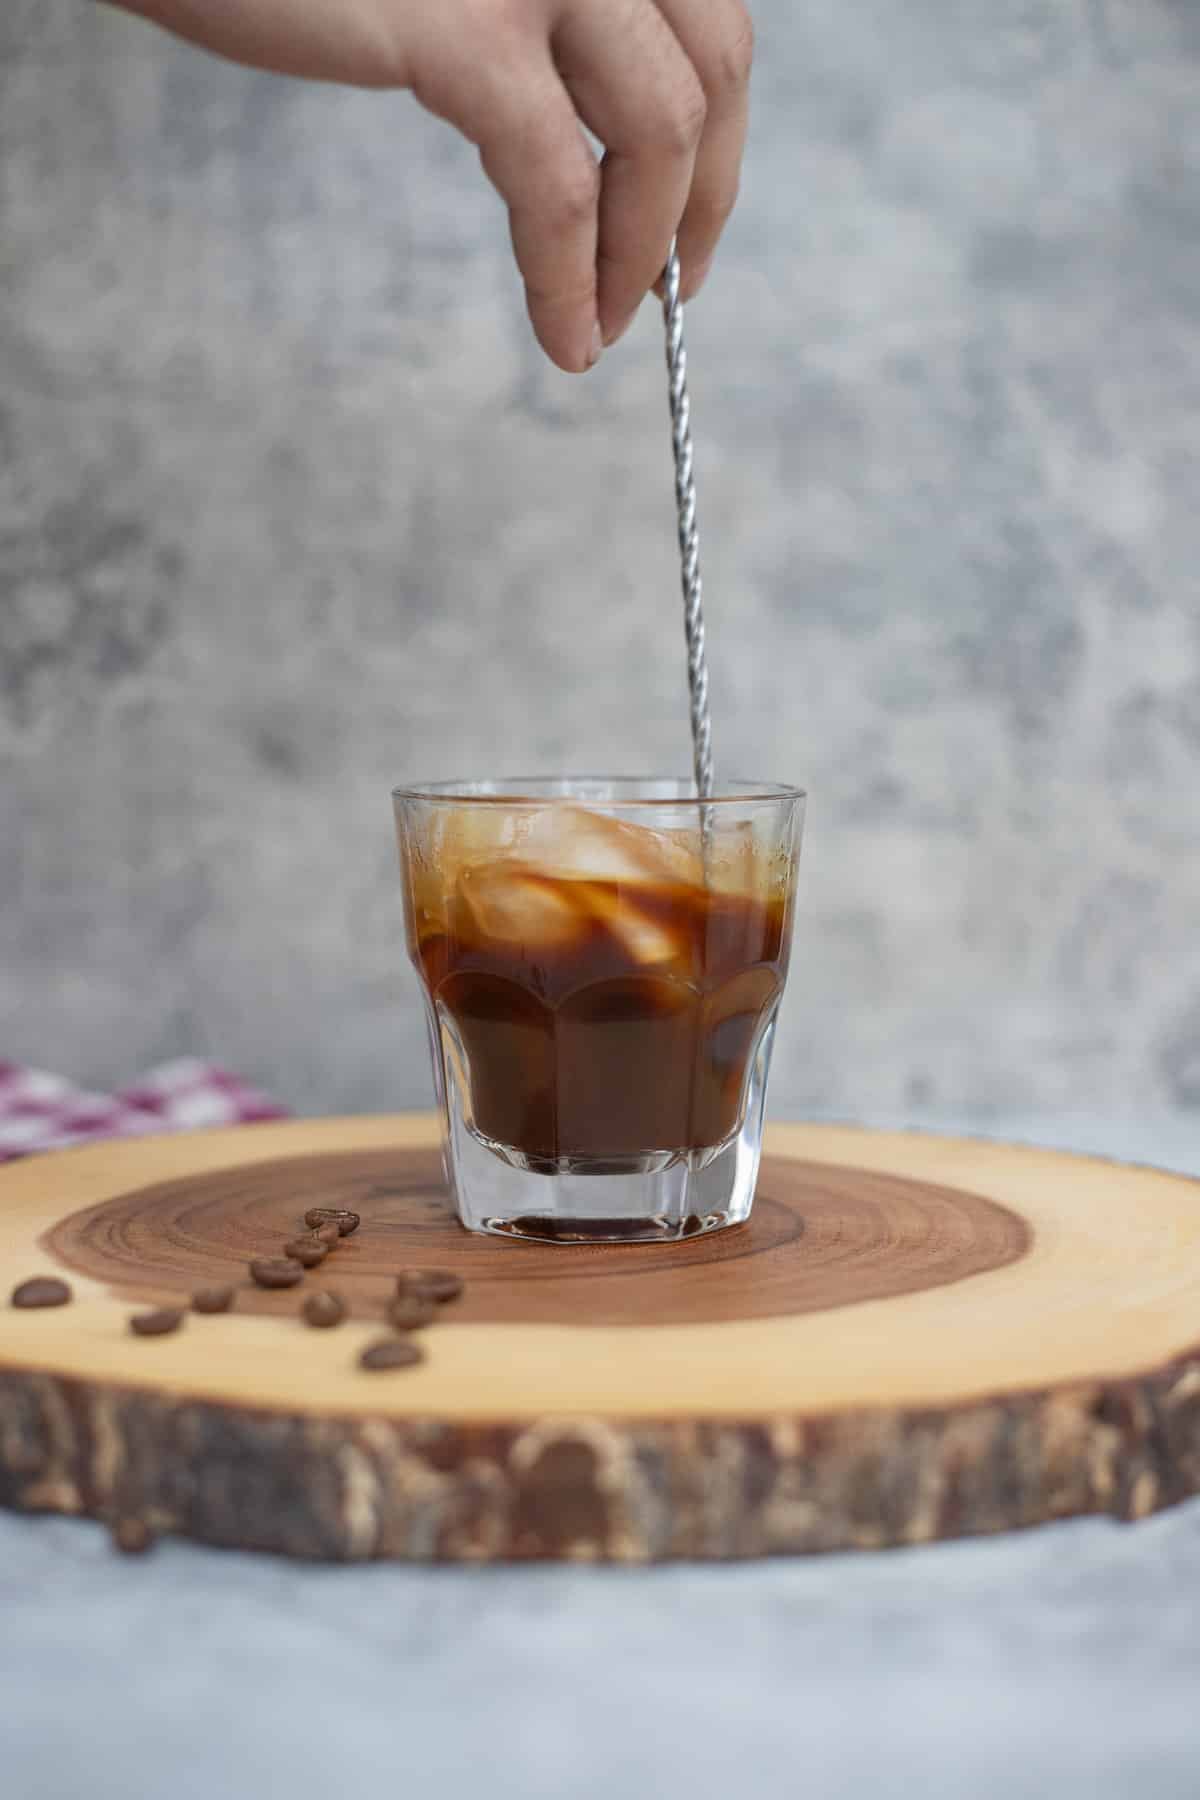 stirring a glass of iced americano coffee with a long spoon